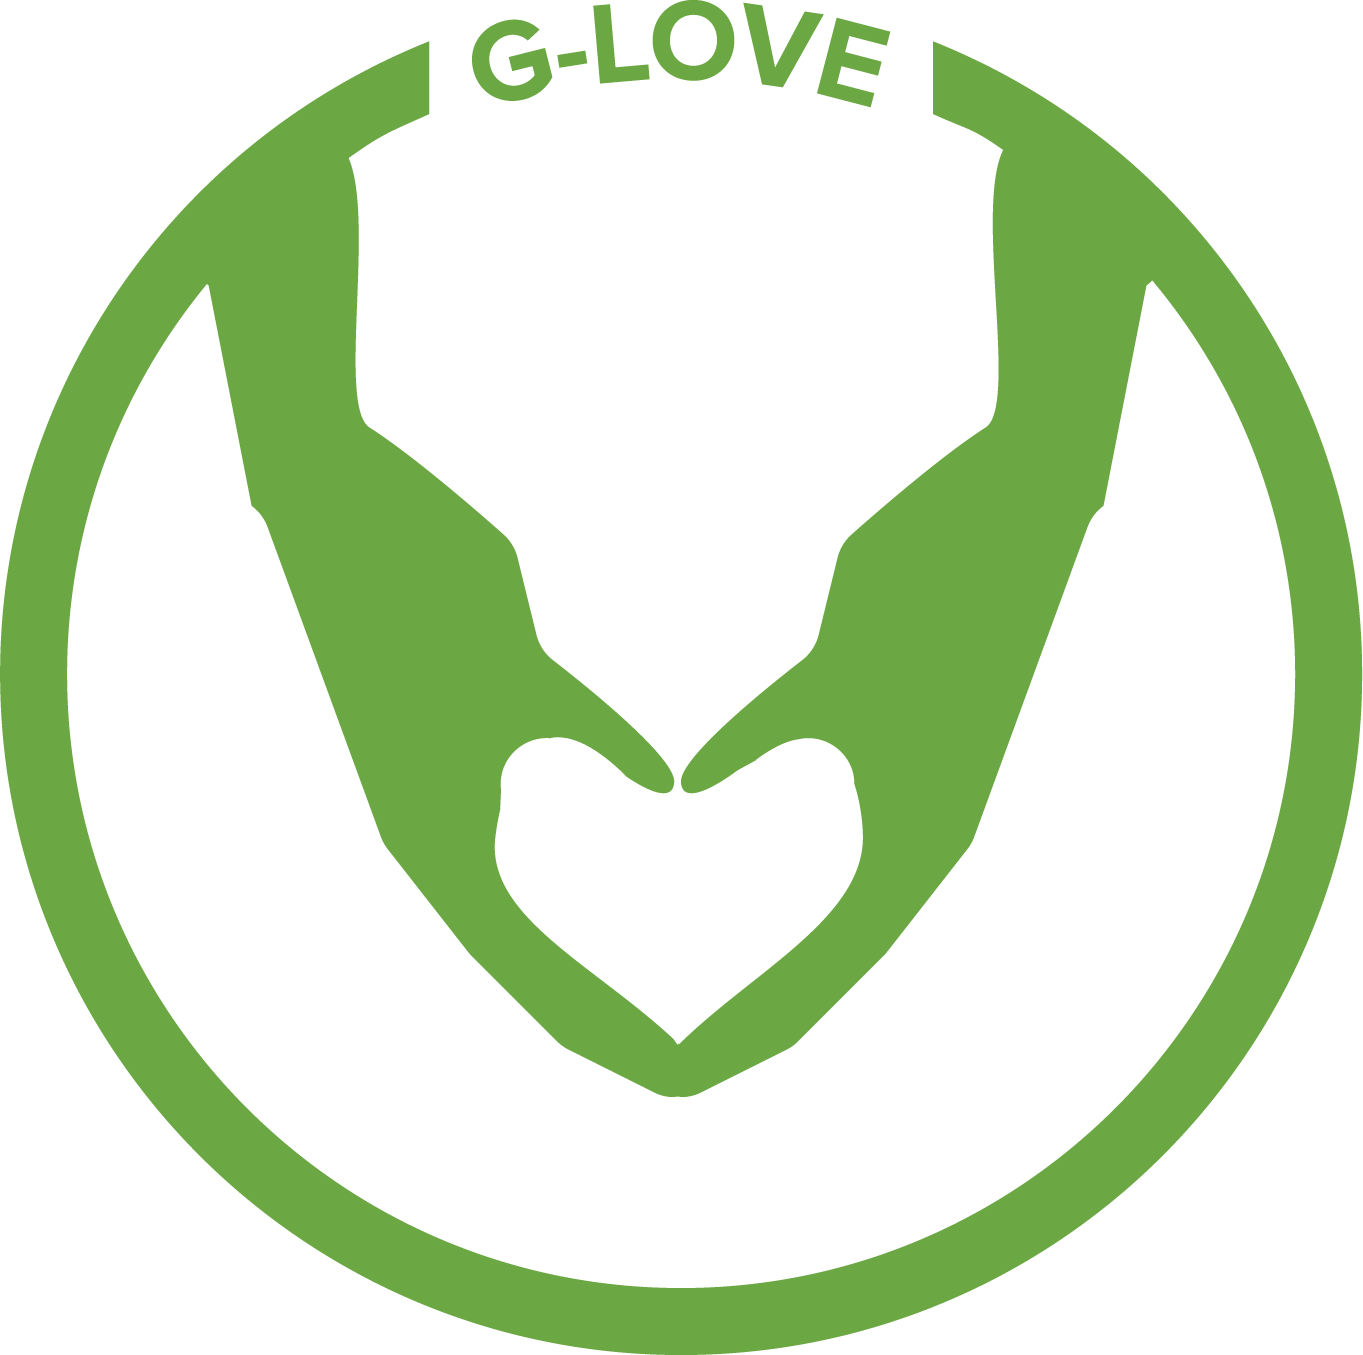 Win 1000 from SW Sustainability’s GLove Video Campaign Contest 2022